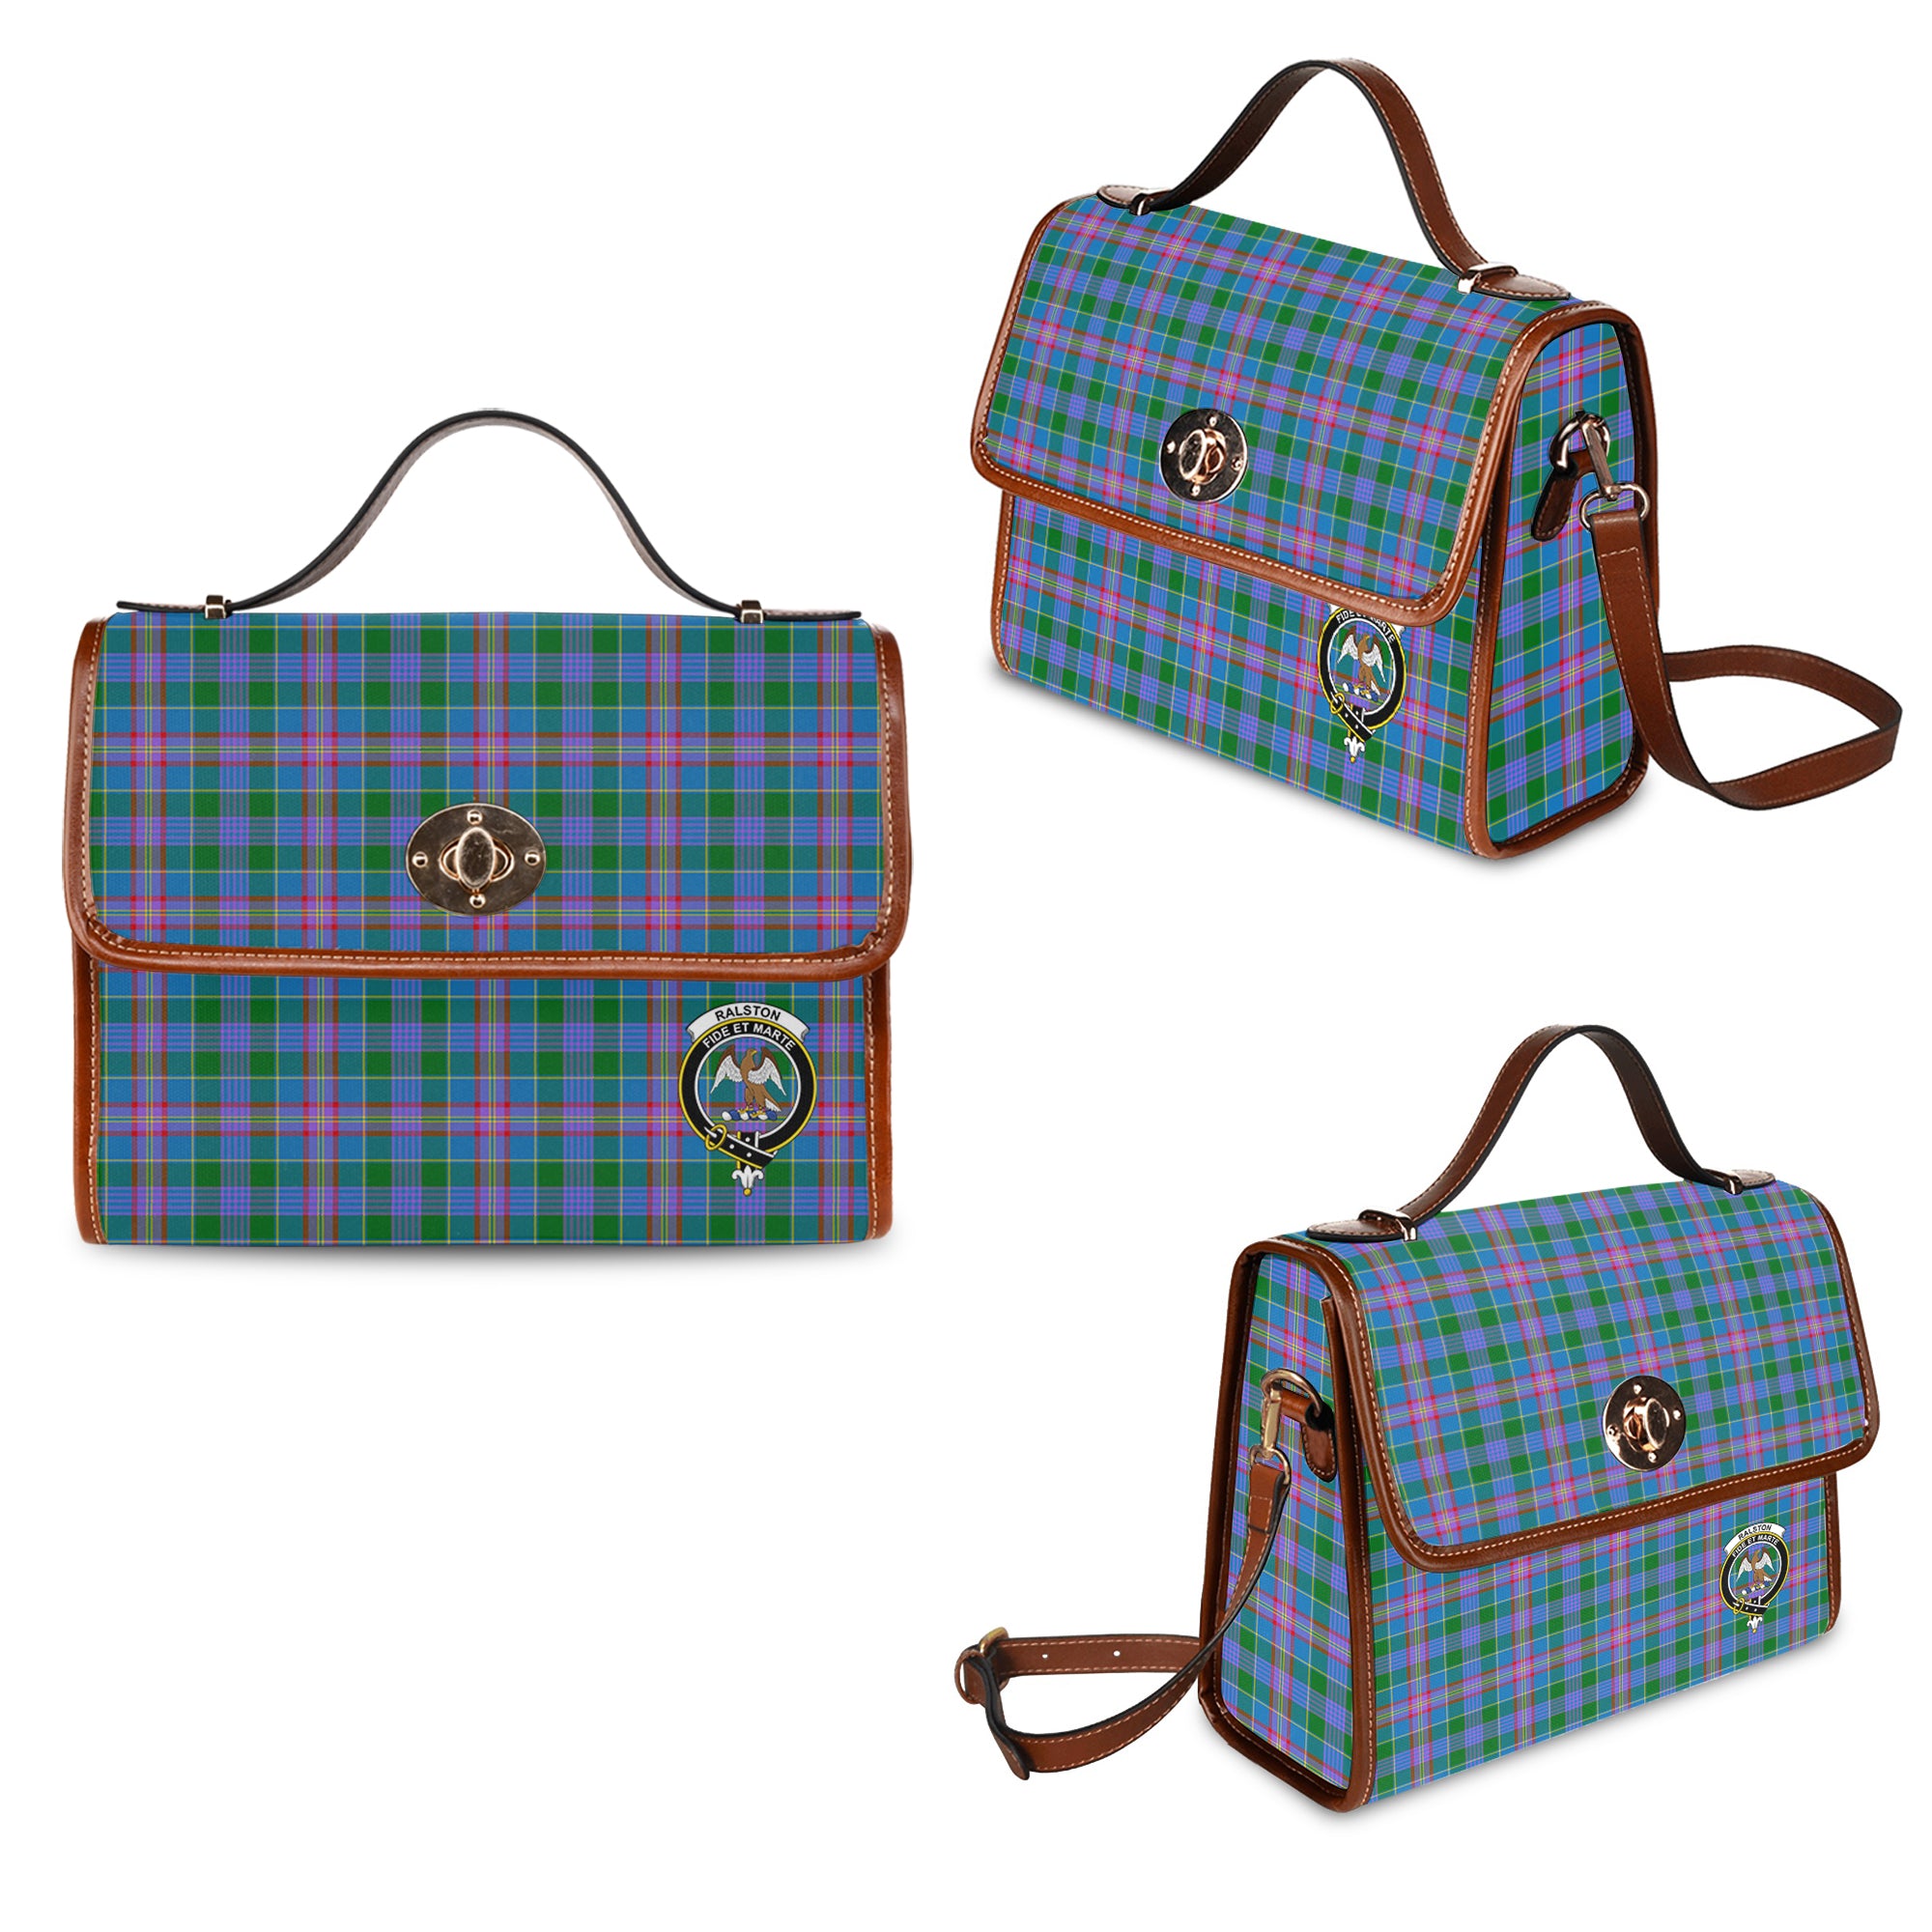 ralston-family-crest-tartan-canvas-bag-with-leather-shoulder-strap